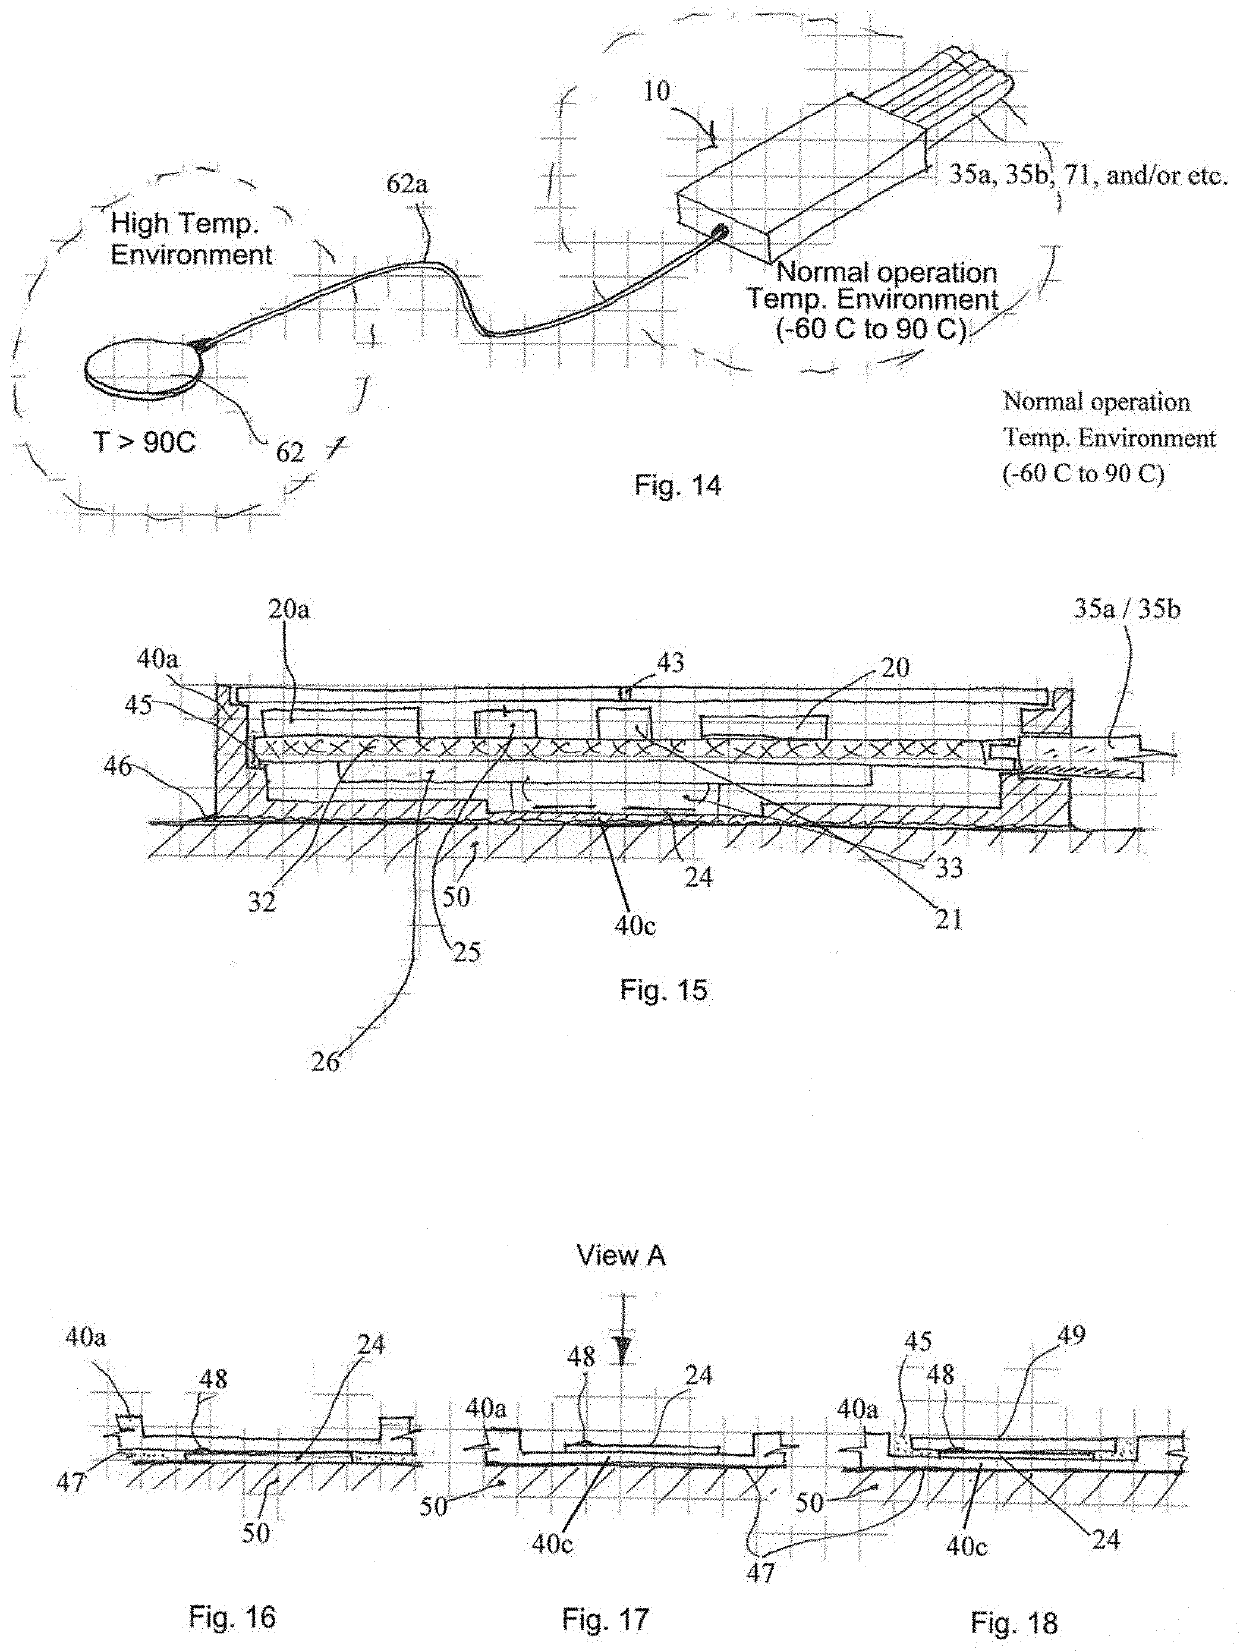 Universal autonomous structural health monitor employing multi sensing inputs and on-board processing